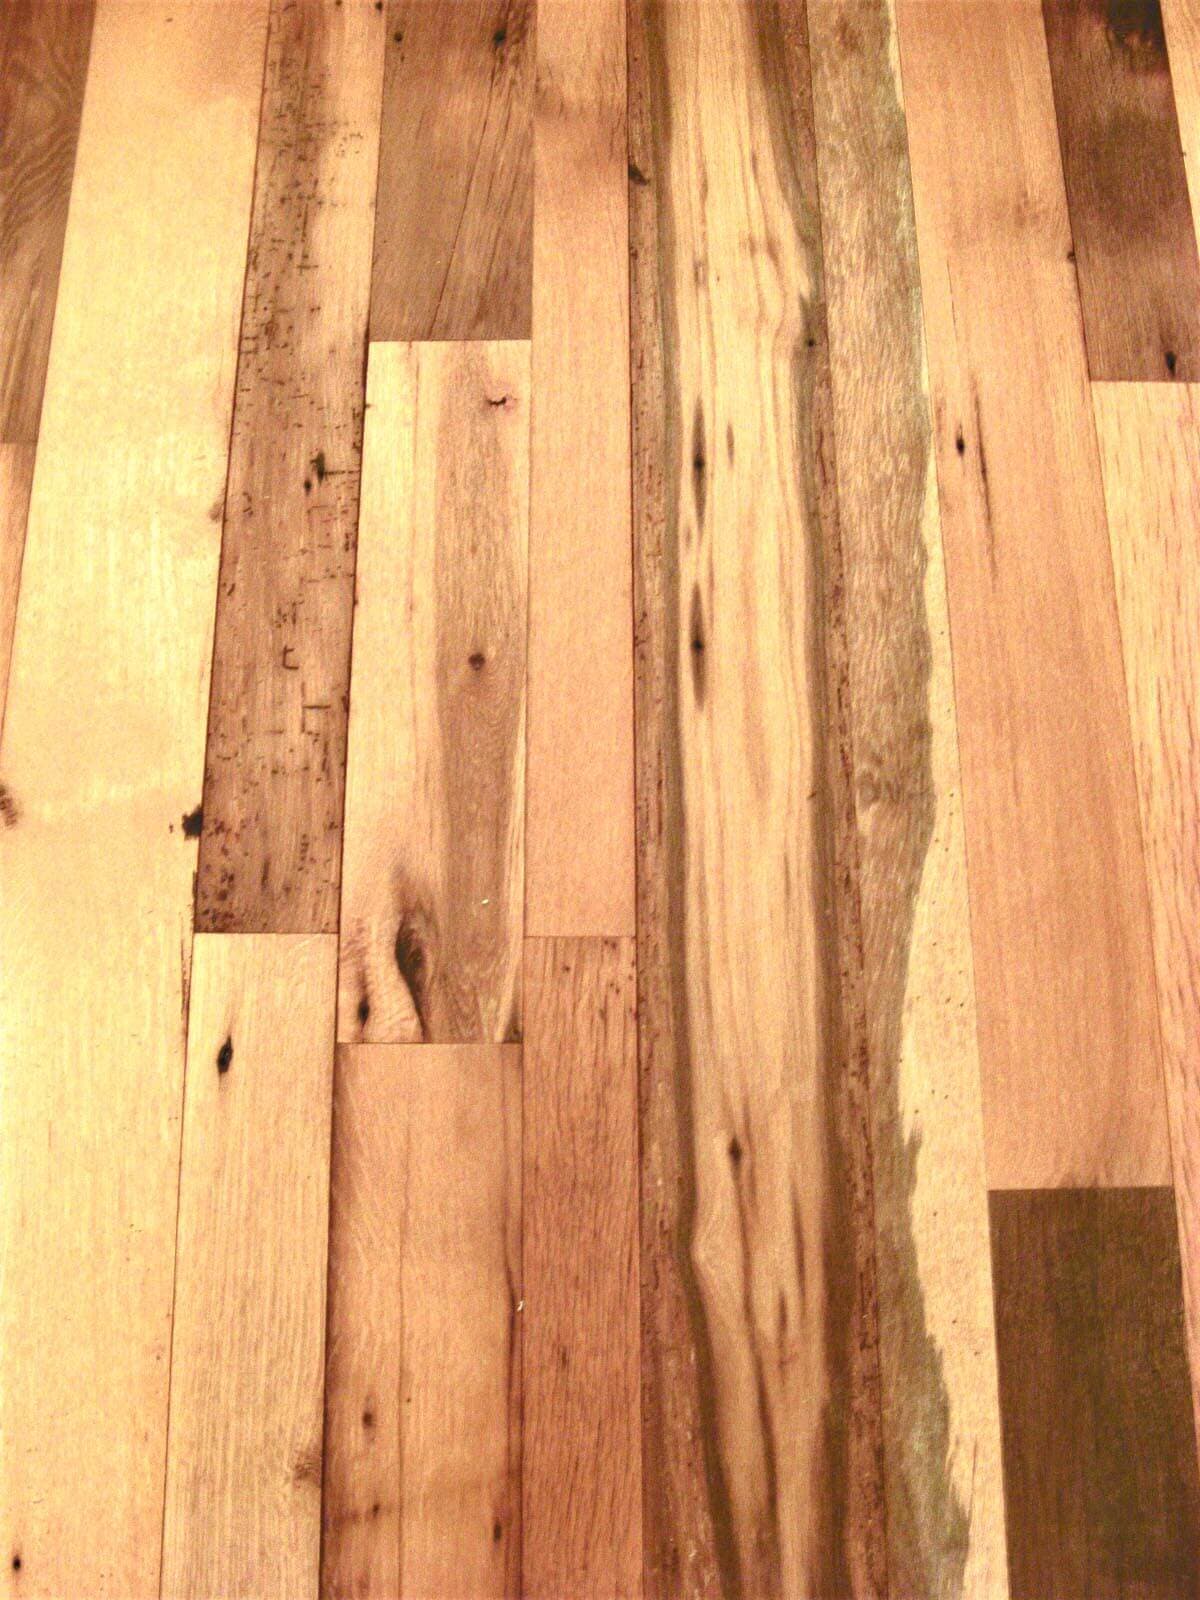 classic mixed hardwood flooring with lively contrasts